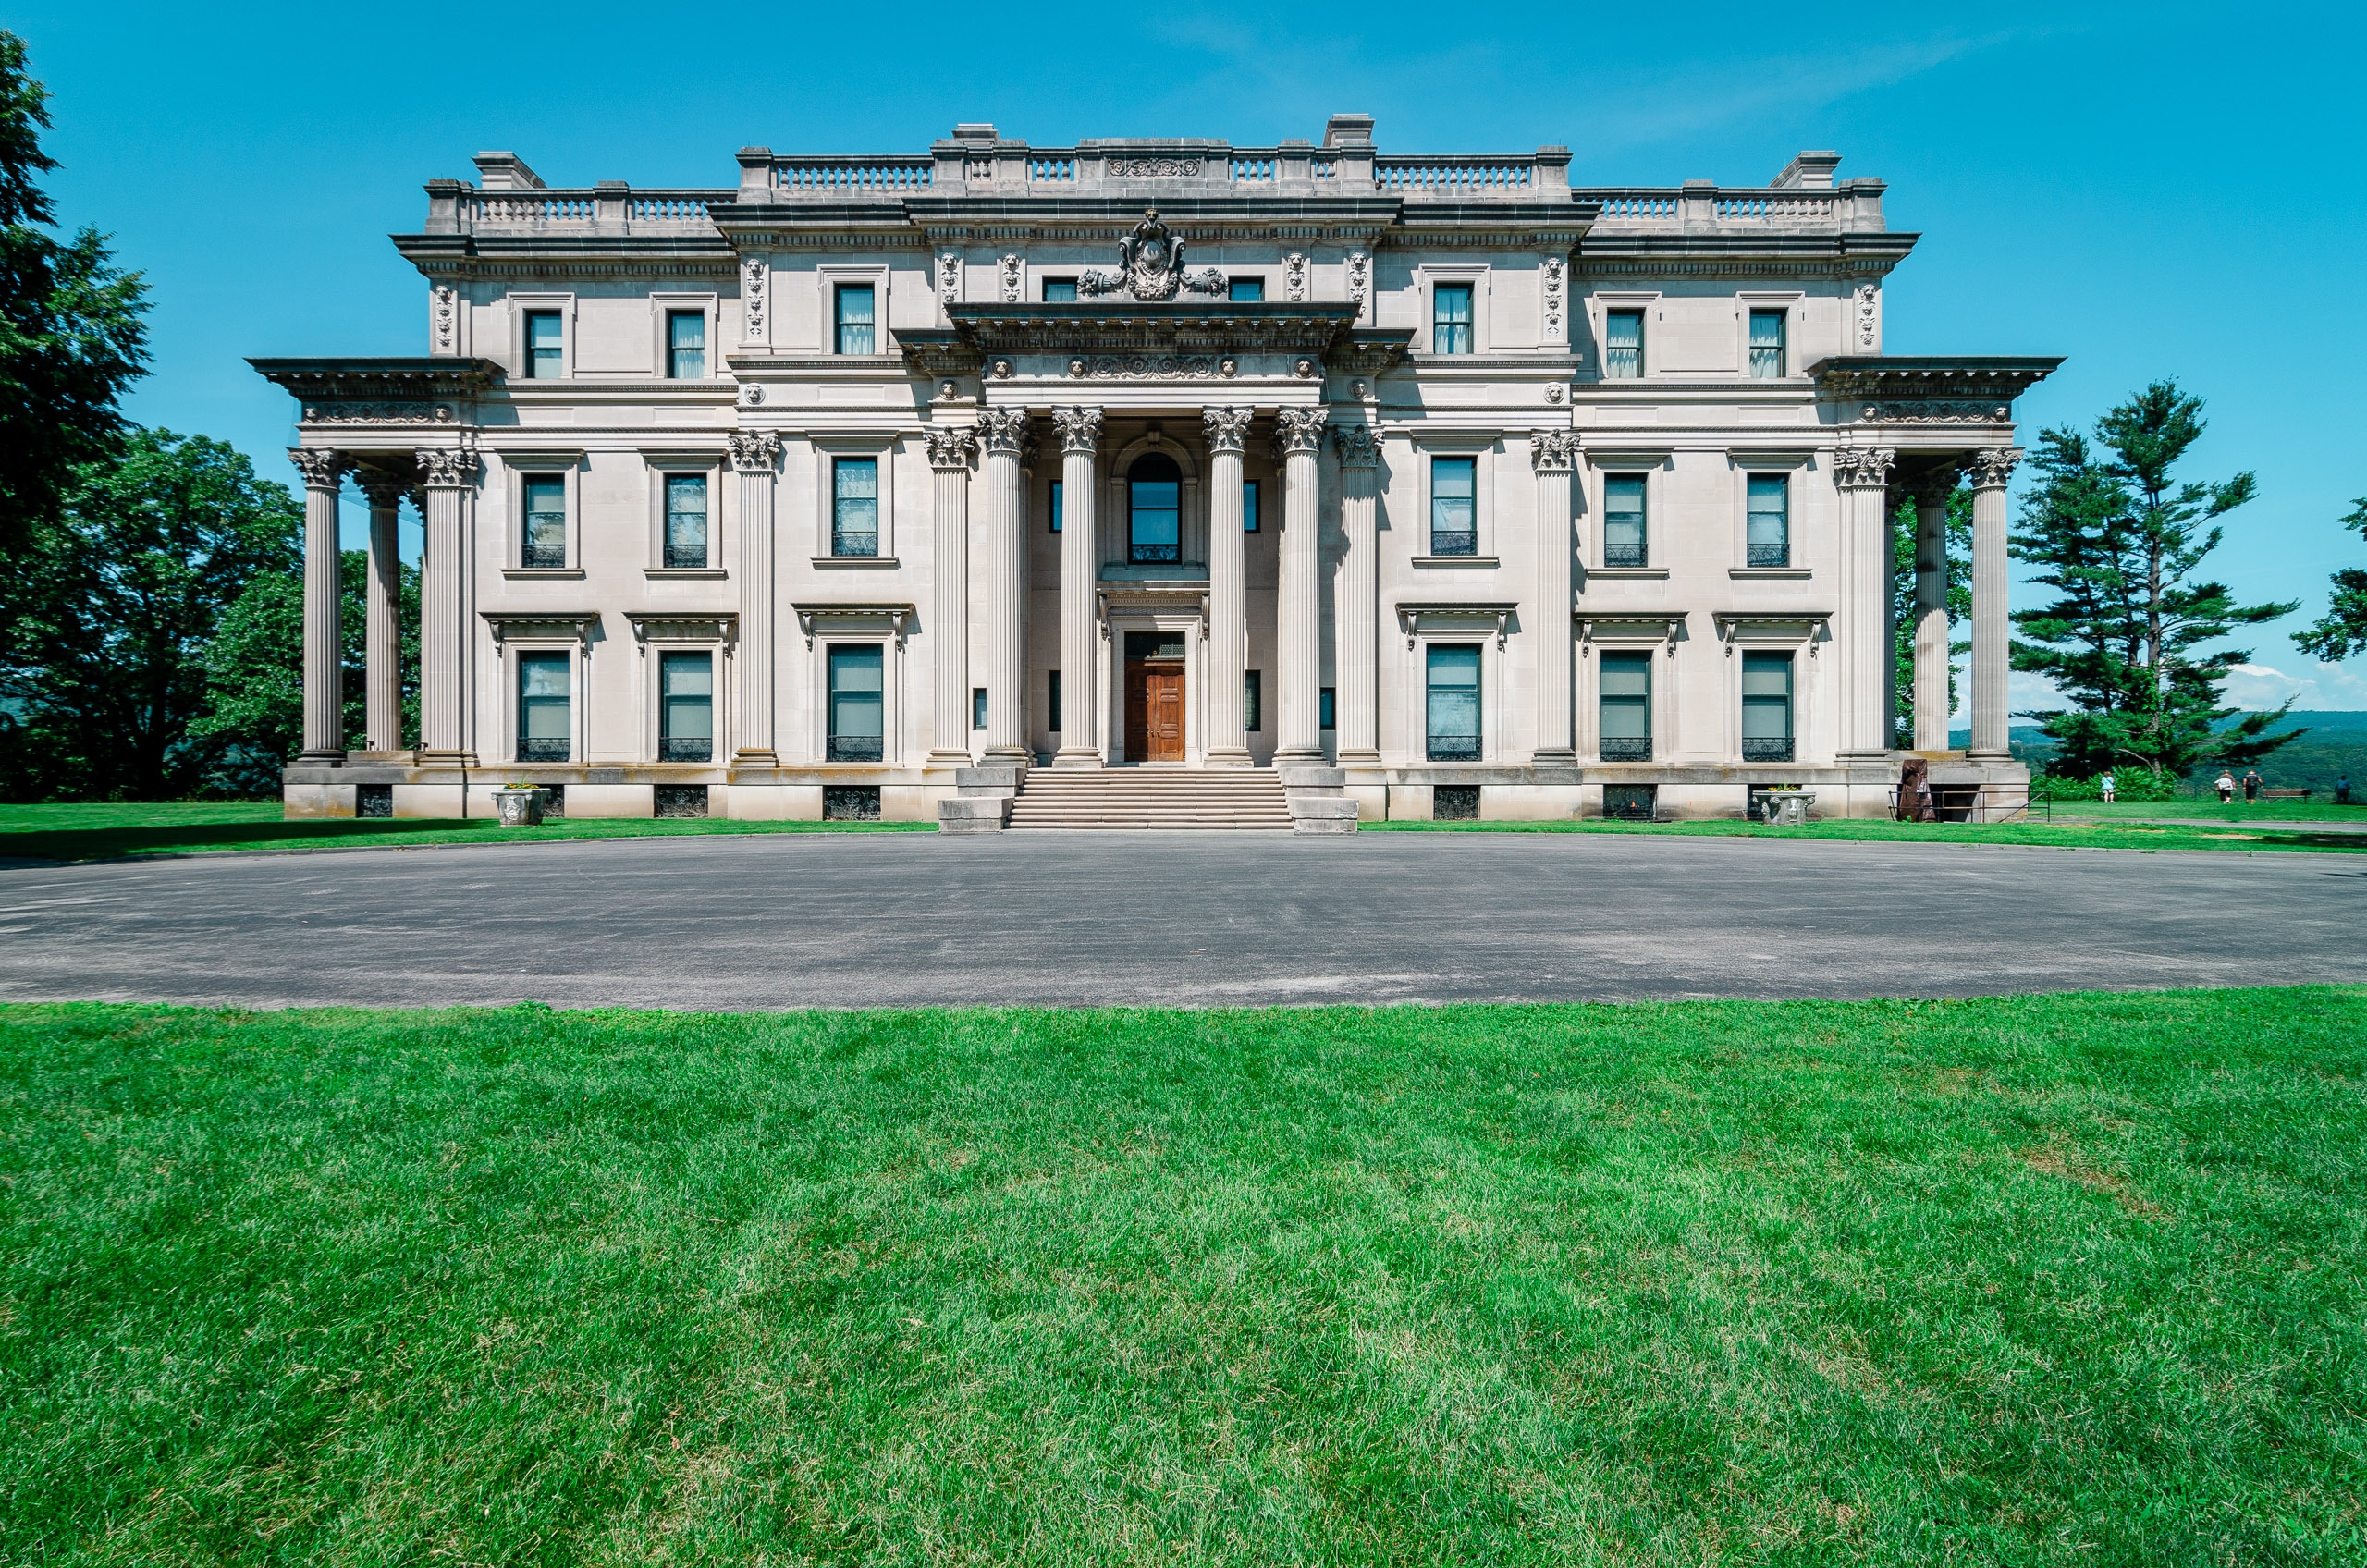 The Vanderbilt mansion in the spring with a green lawn.